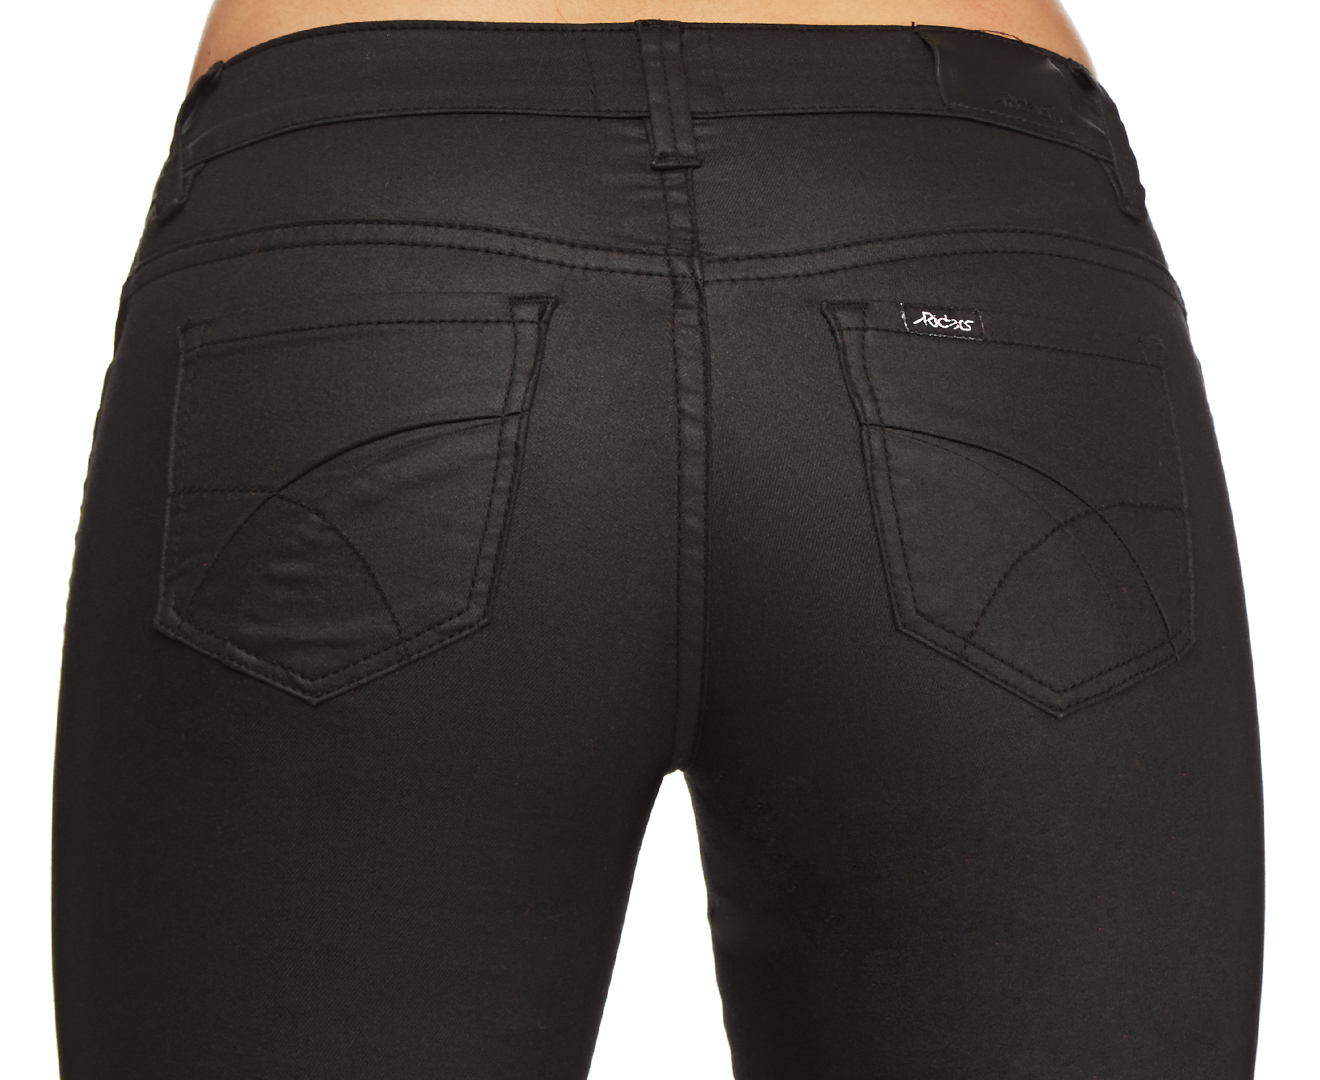 bumster vegas jeans riders